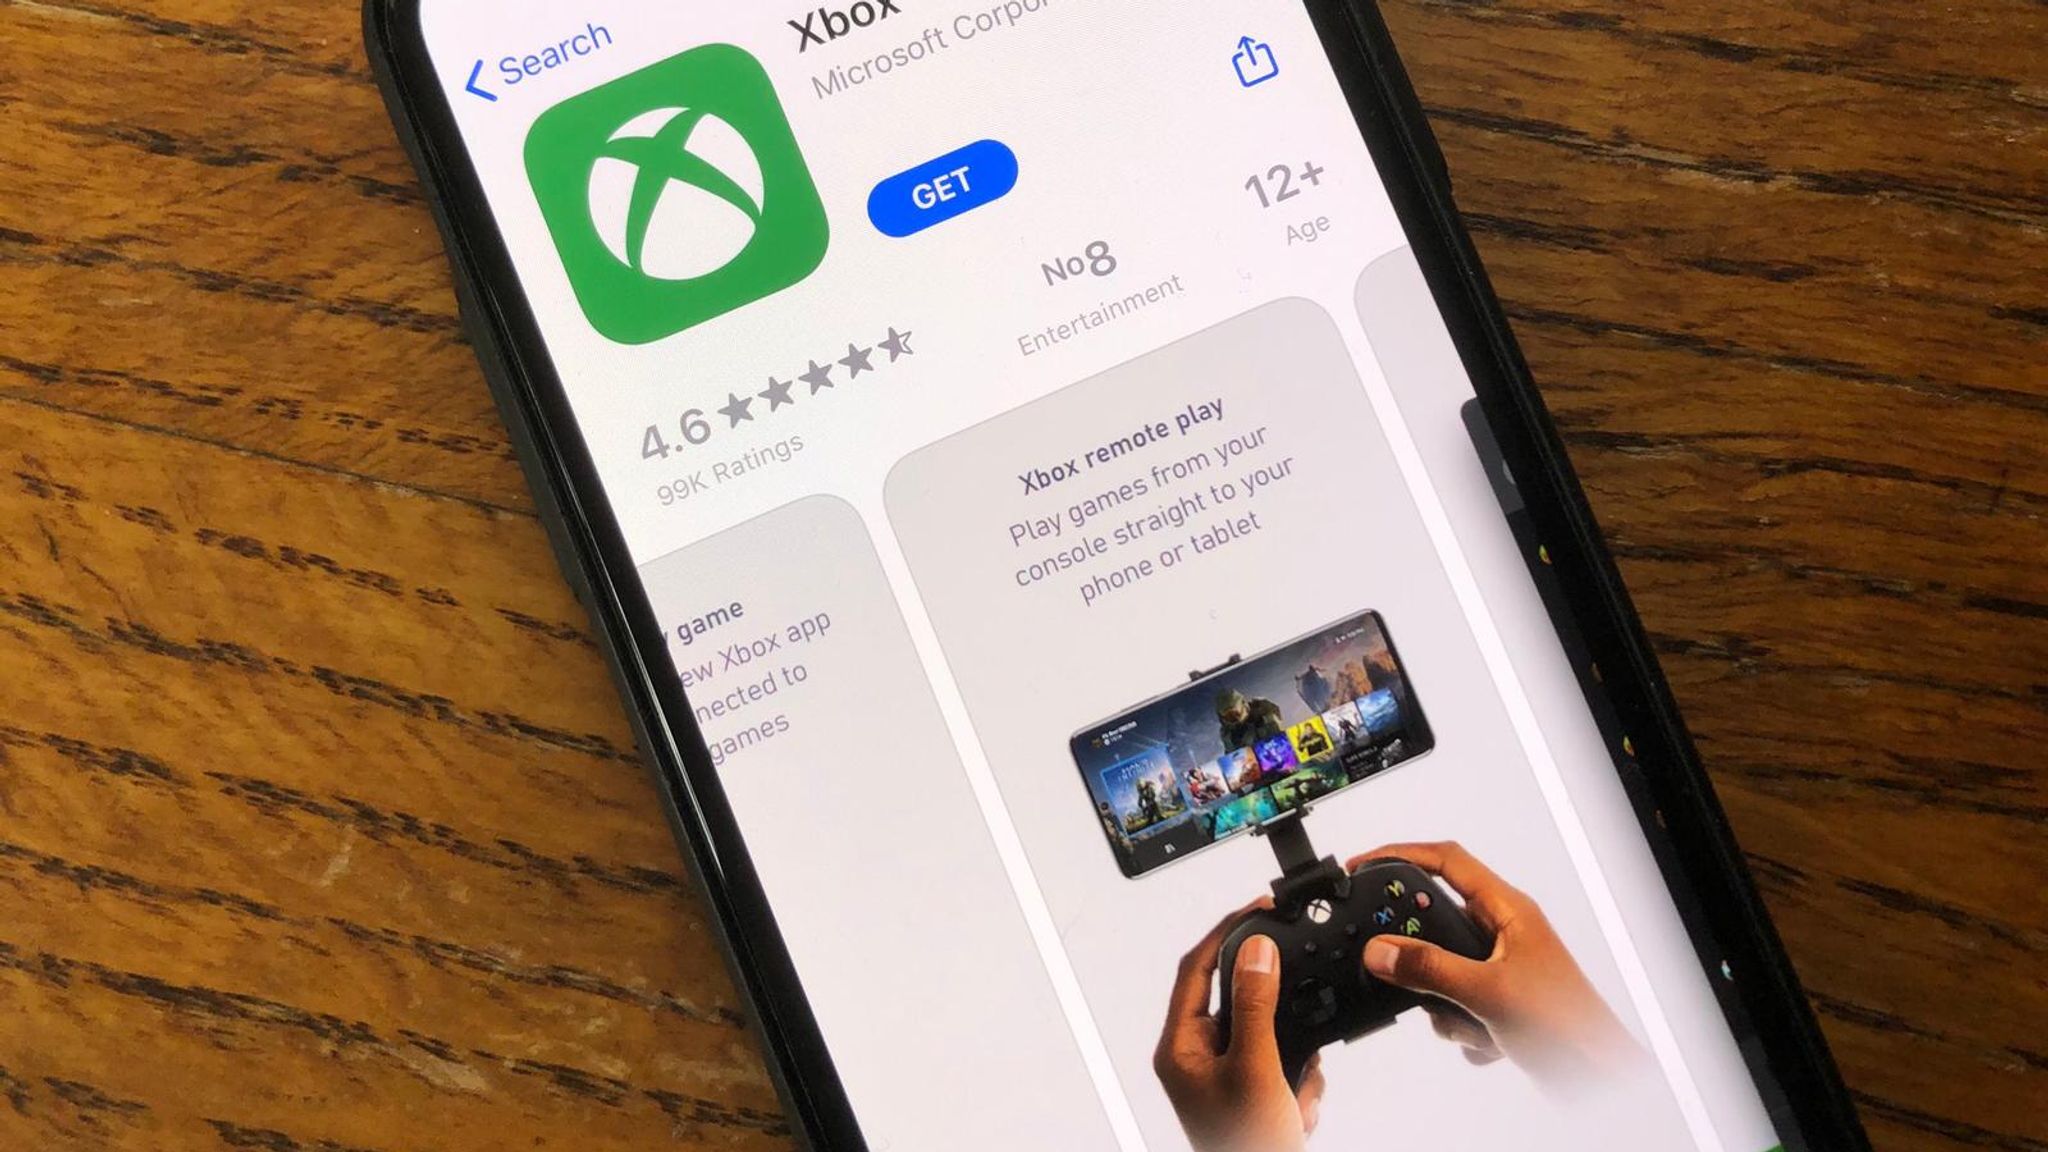 Microsoft Updates Xbox Cloud Gaming For IPhone And IPad